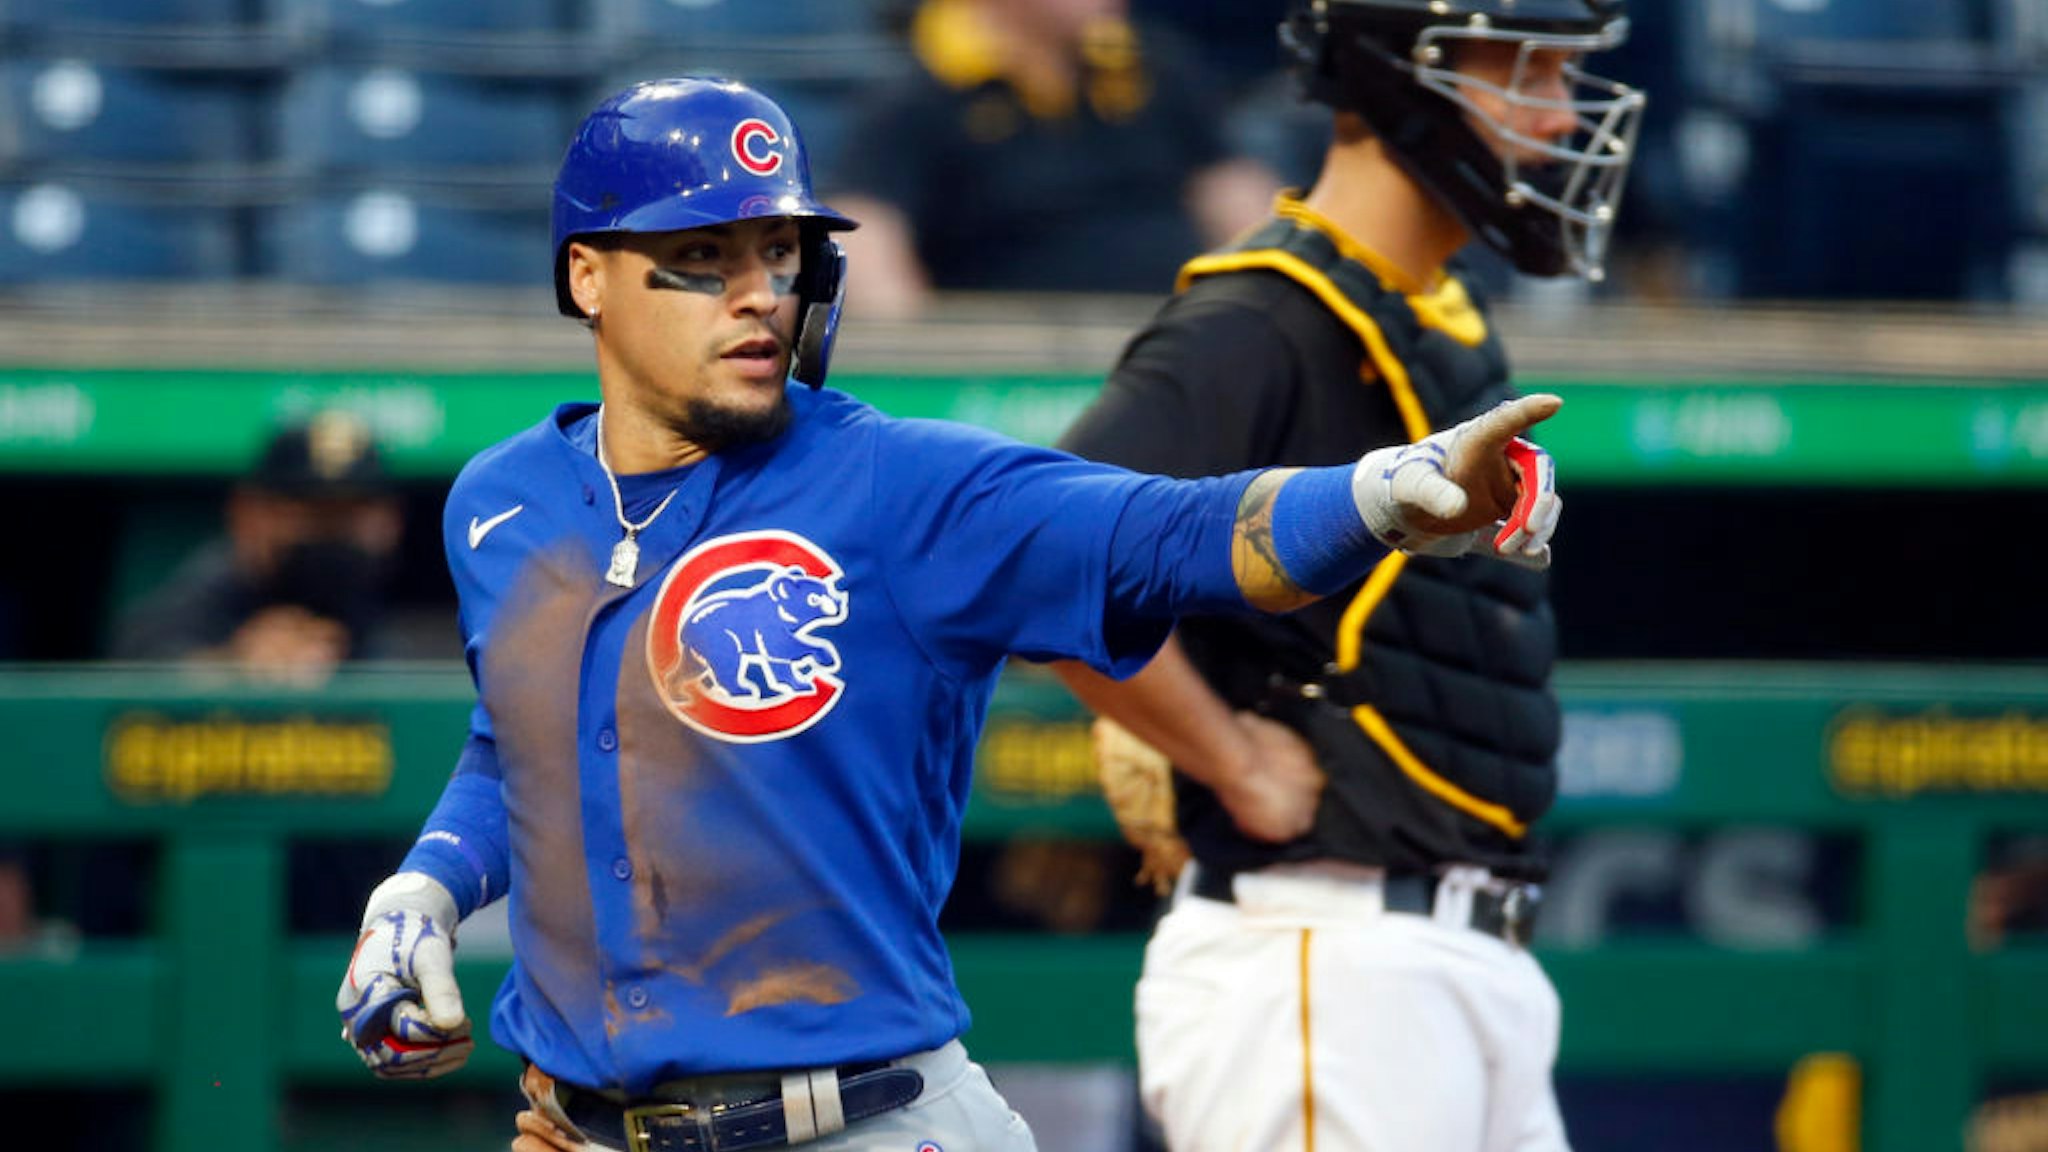 PITTSBURGH, PA - MAY 25: Javier Baez #9 of the Chicago Cubs celebrates after scoring on a RBI single in the fifth inning against the Pittsburgh Pirates at PNC Park on May 25, 2021 in Pittsburgh, Pennsylvania. (Photo by Justin K. Aller/Getty Images)